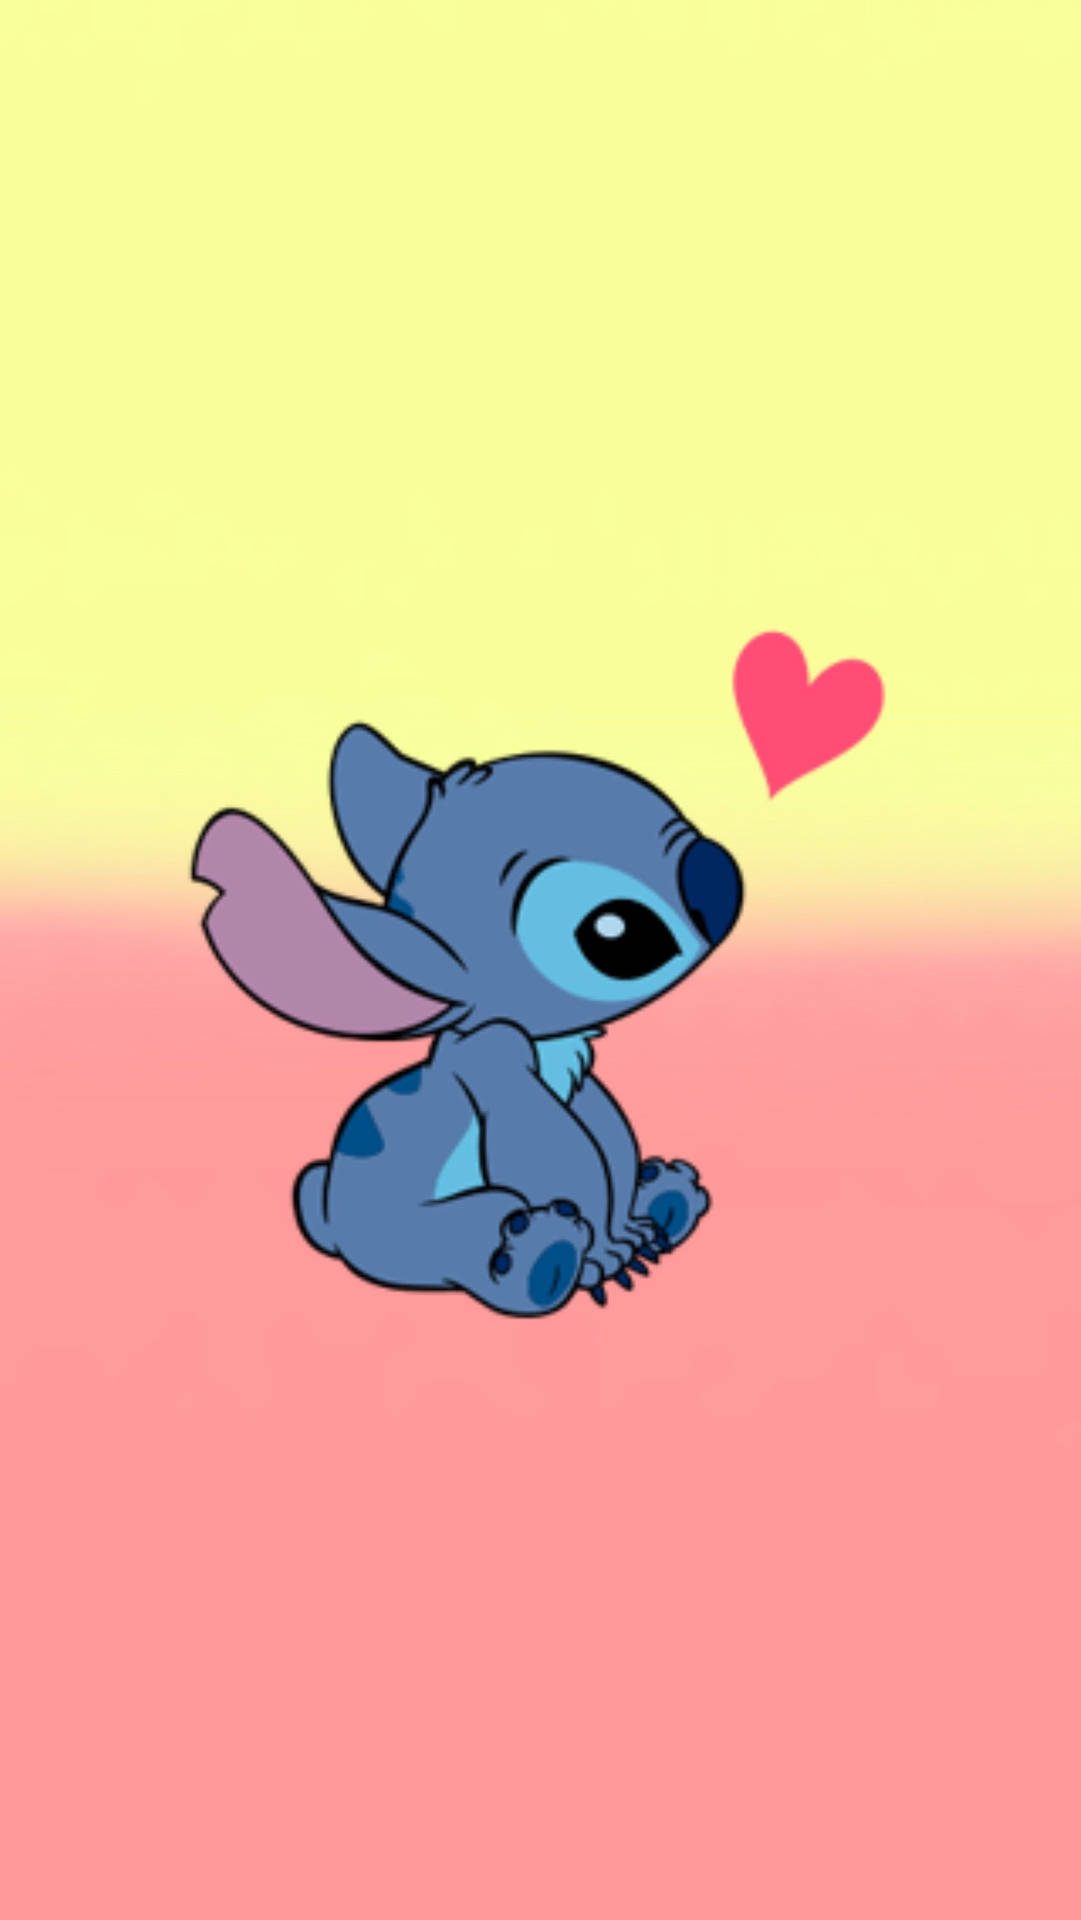 Download Endearing Stitch Galaxy Wallpaper | Wallpapers.com